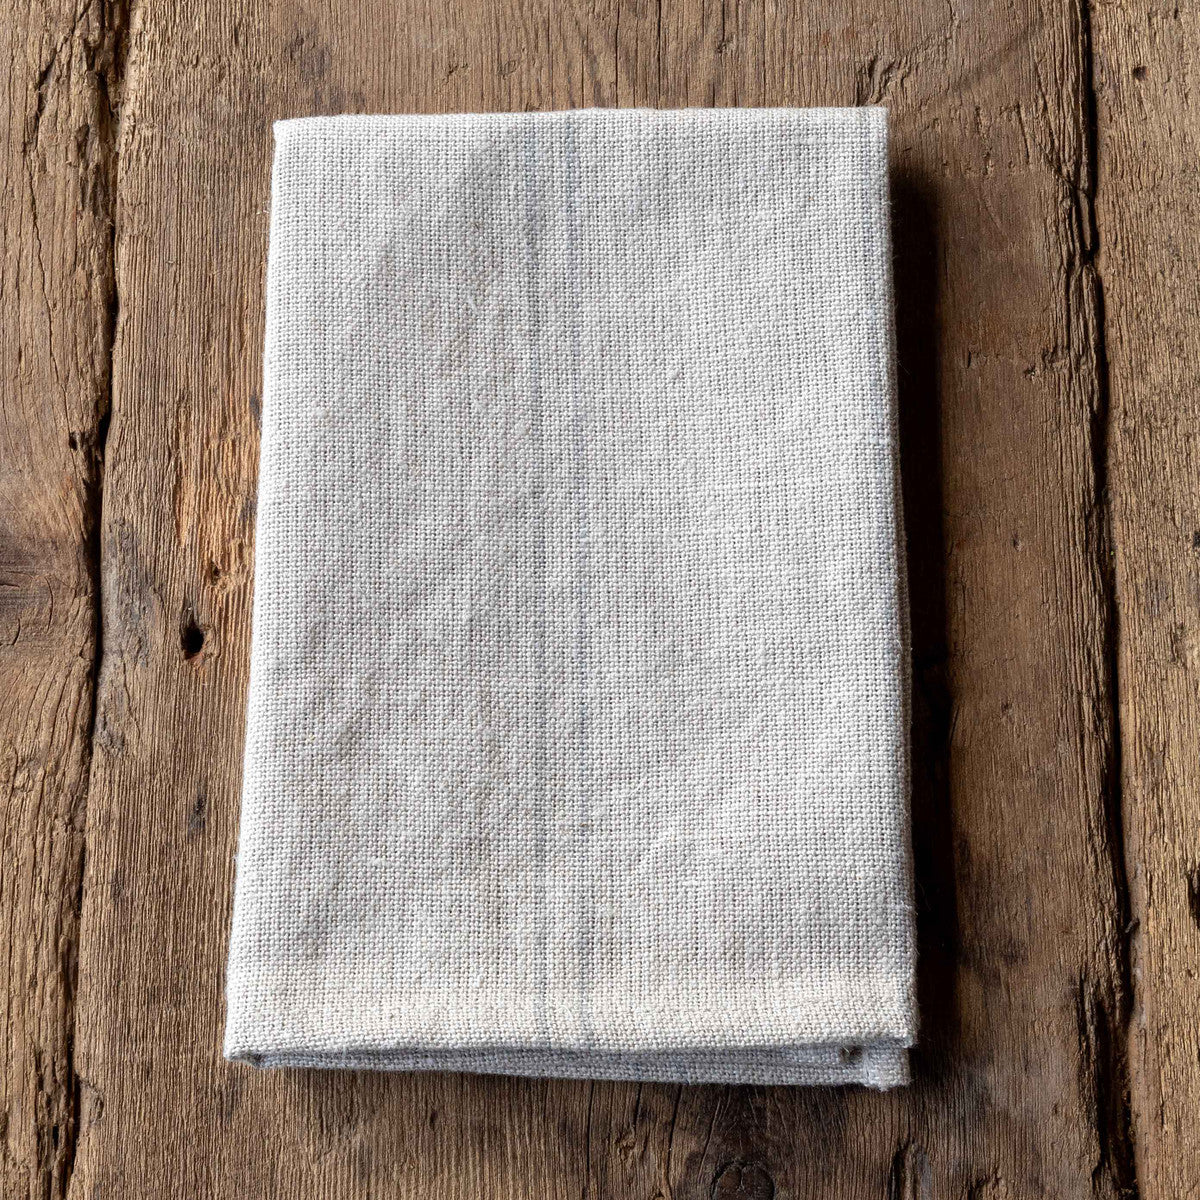 Pewter Pinstriped Woven Linen Cloth Napkin